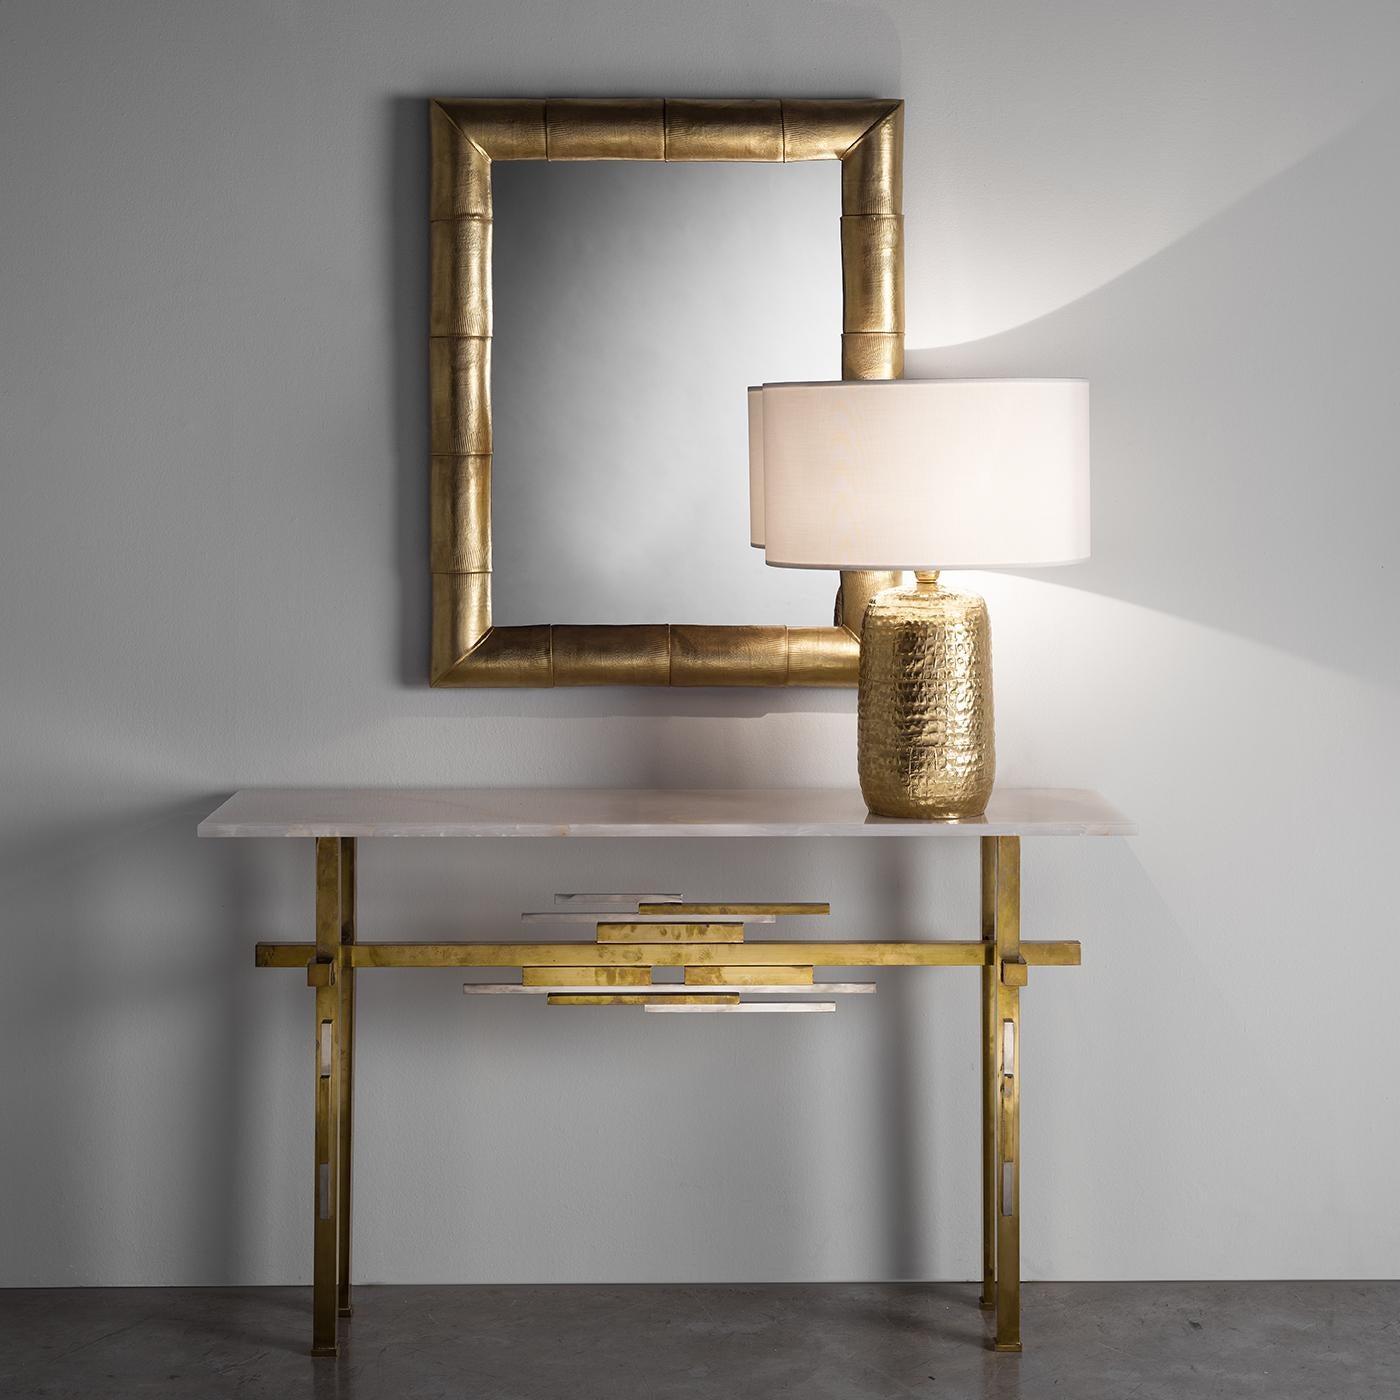 An exercise in contrasts, this stunning table lamp is a work of art to display in both a Classic and contemporary interior to add a dynamic and sophisticated accent. The linear fabric shade in traditional drum shape tops a magnificent base in metal